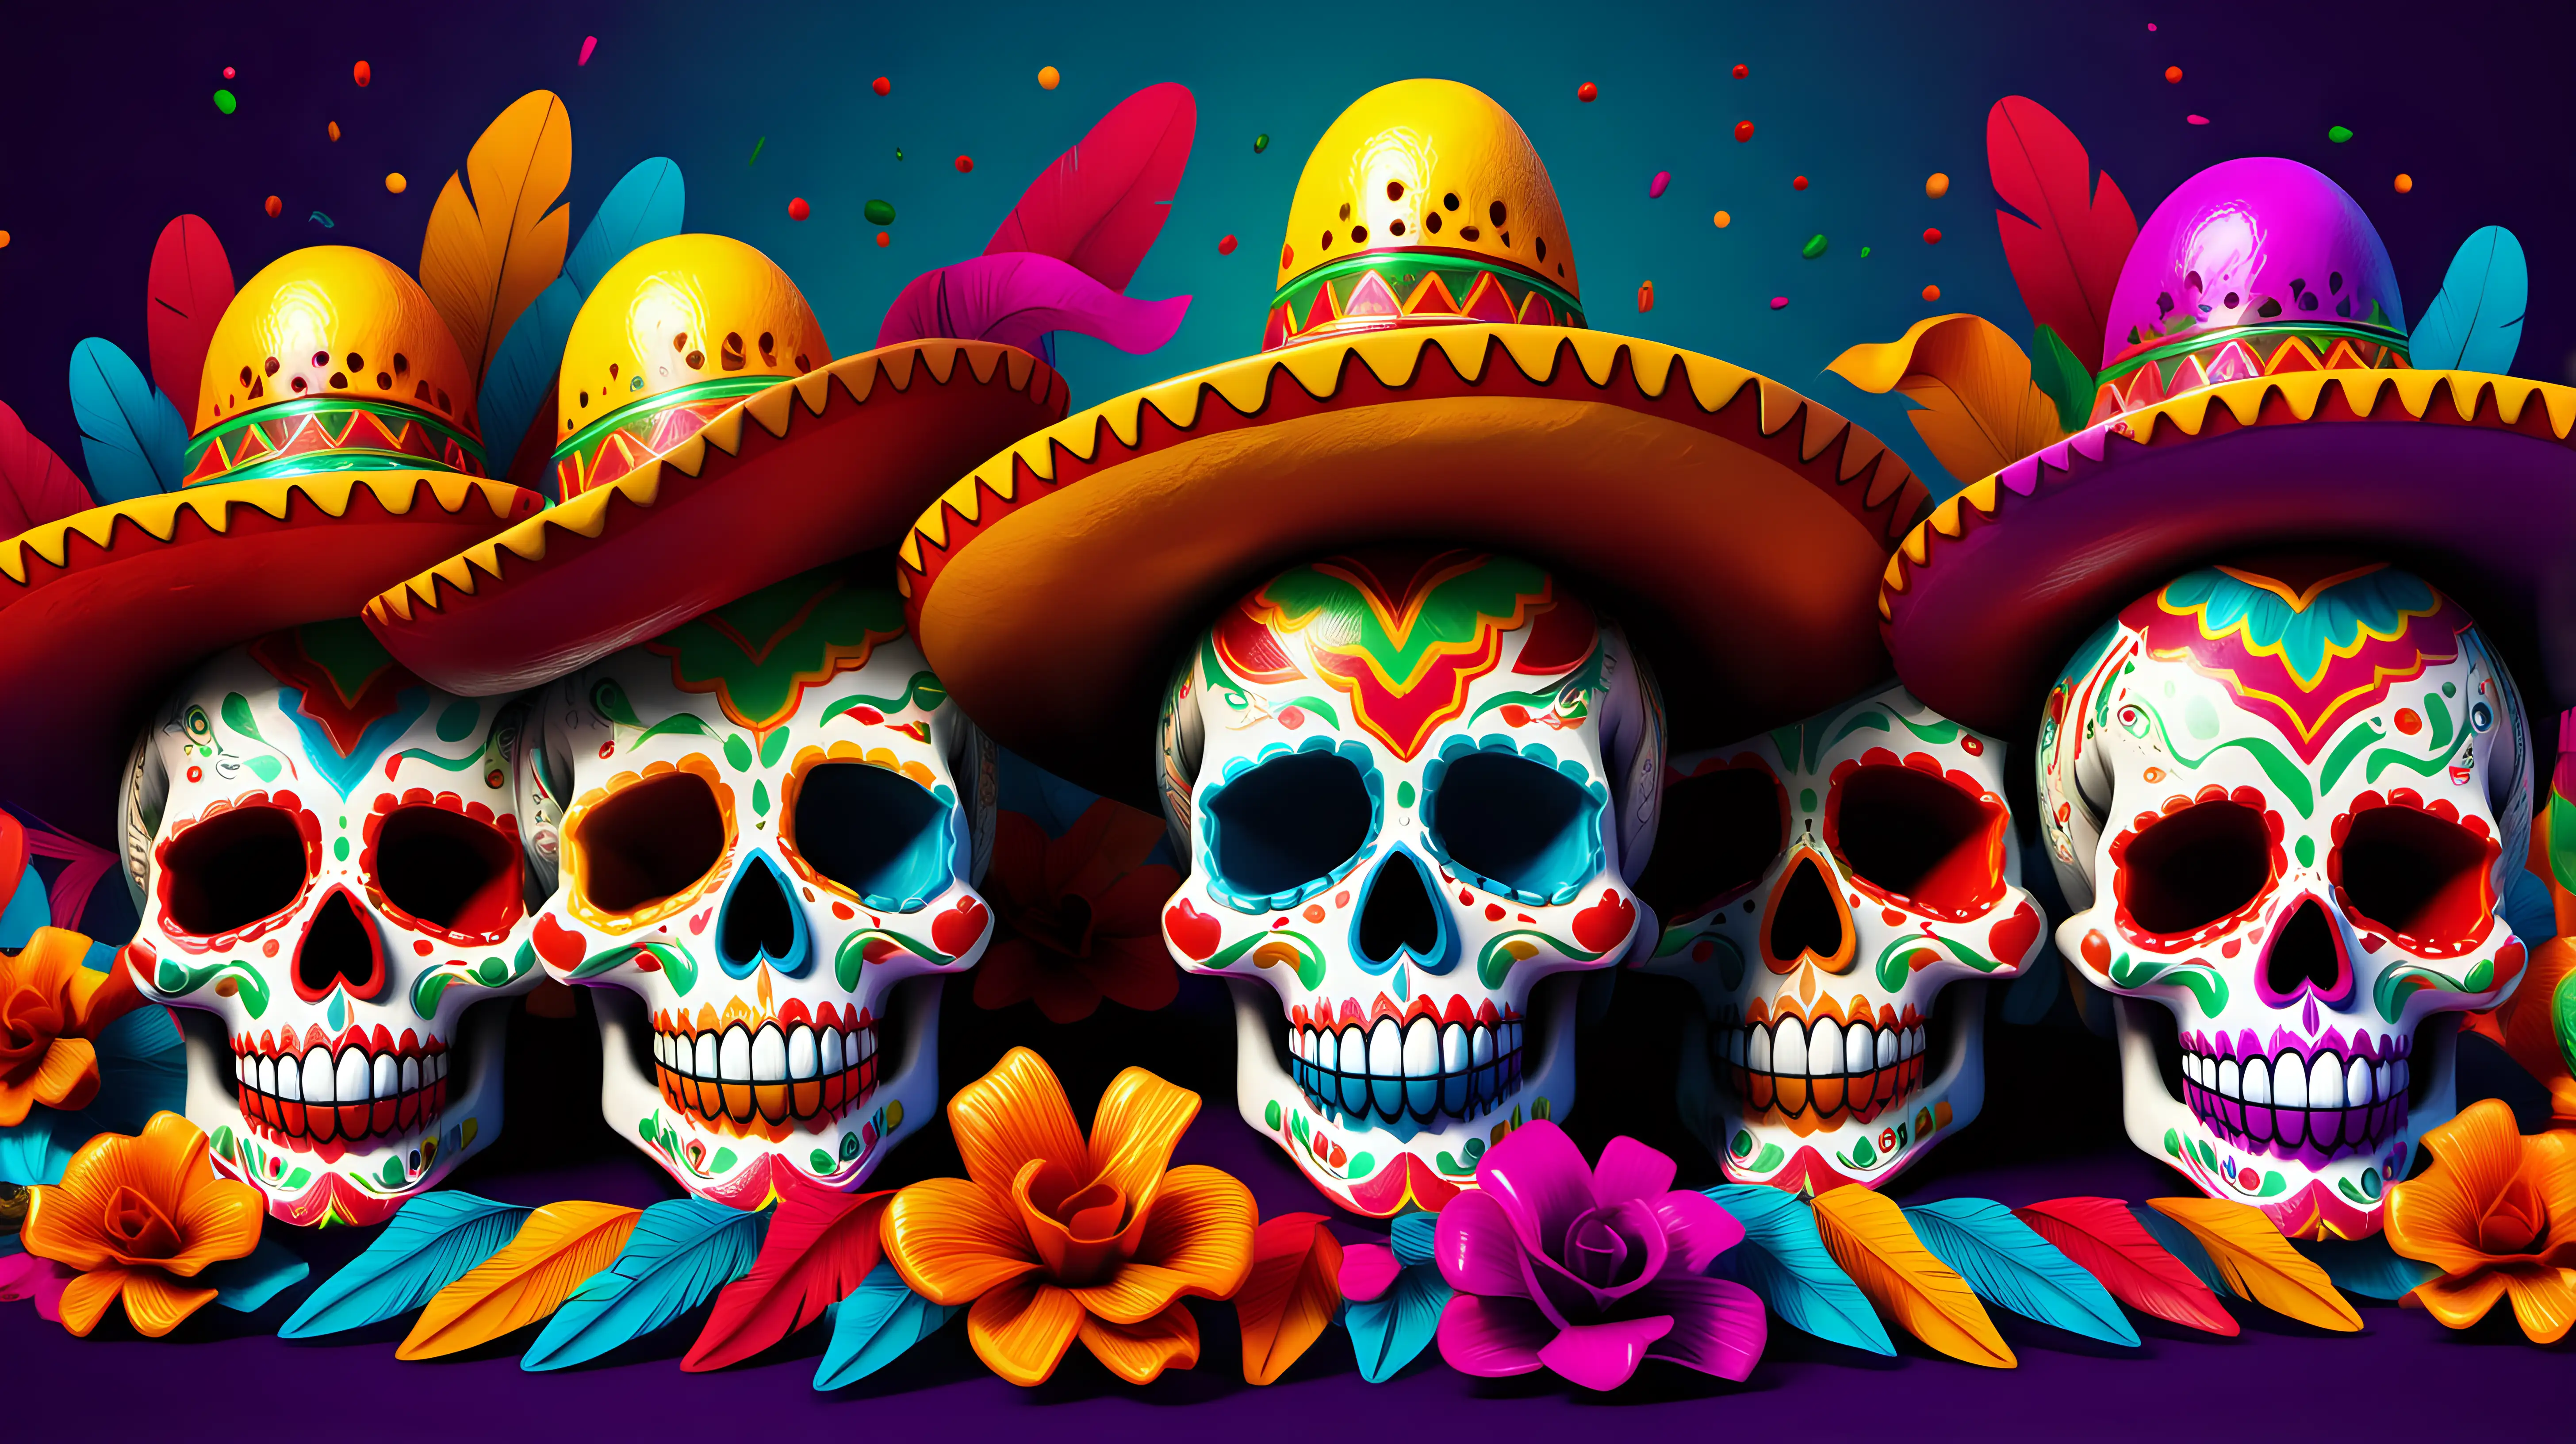 Cinco de Mayo-inspired skulls, presented in a vibrant and colorful style in a 16:9 aspect ratio